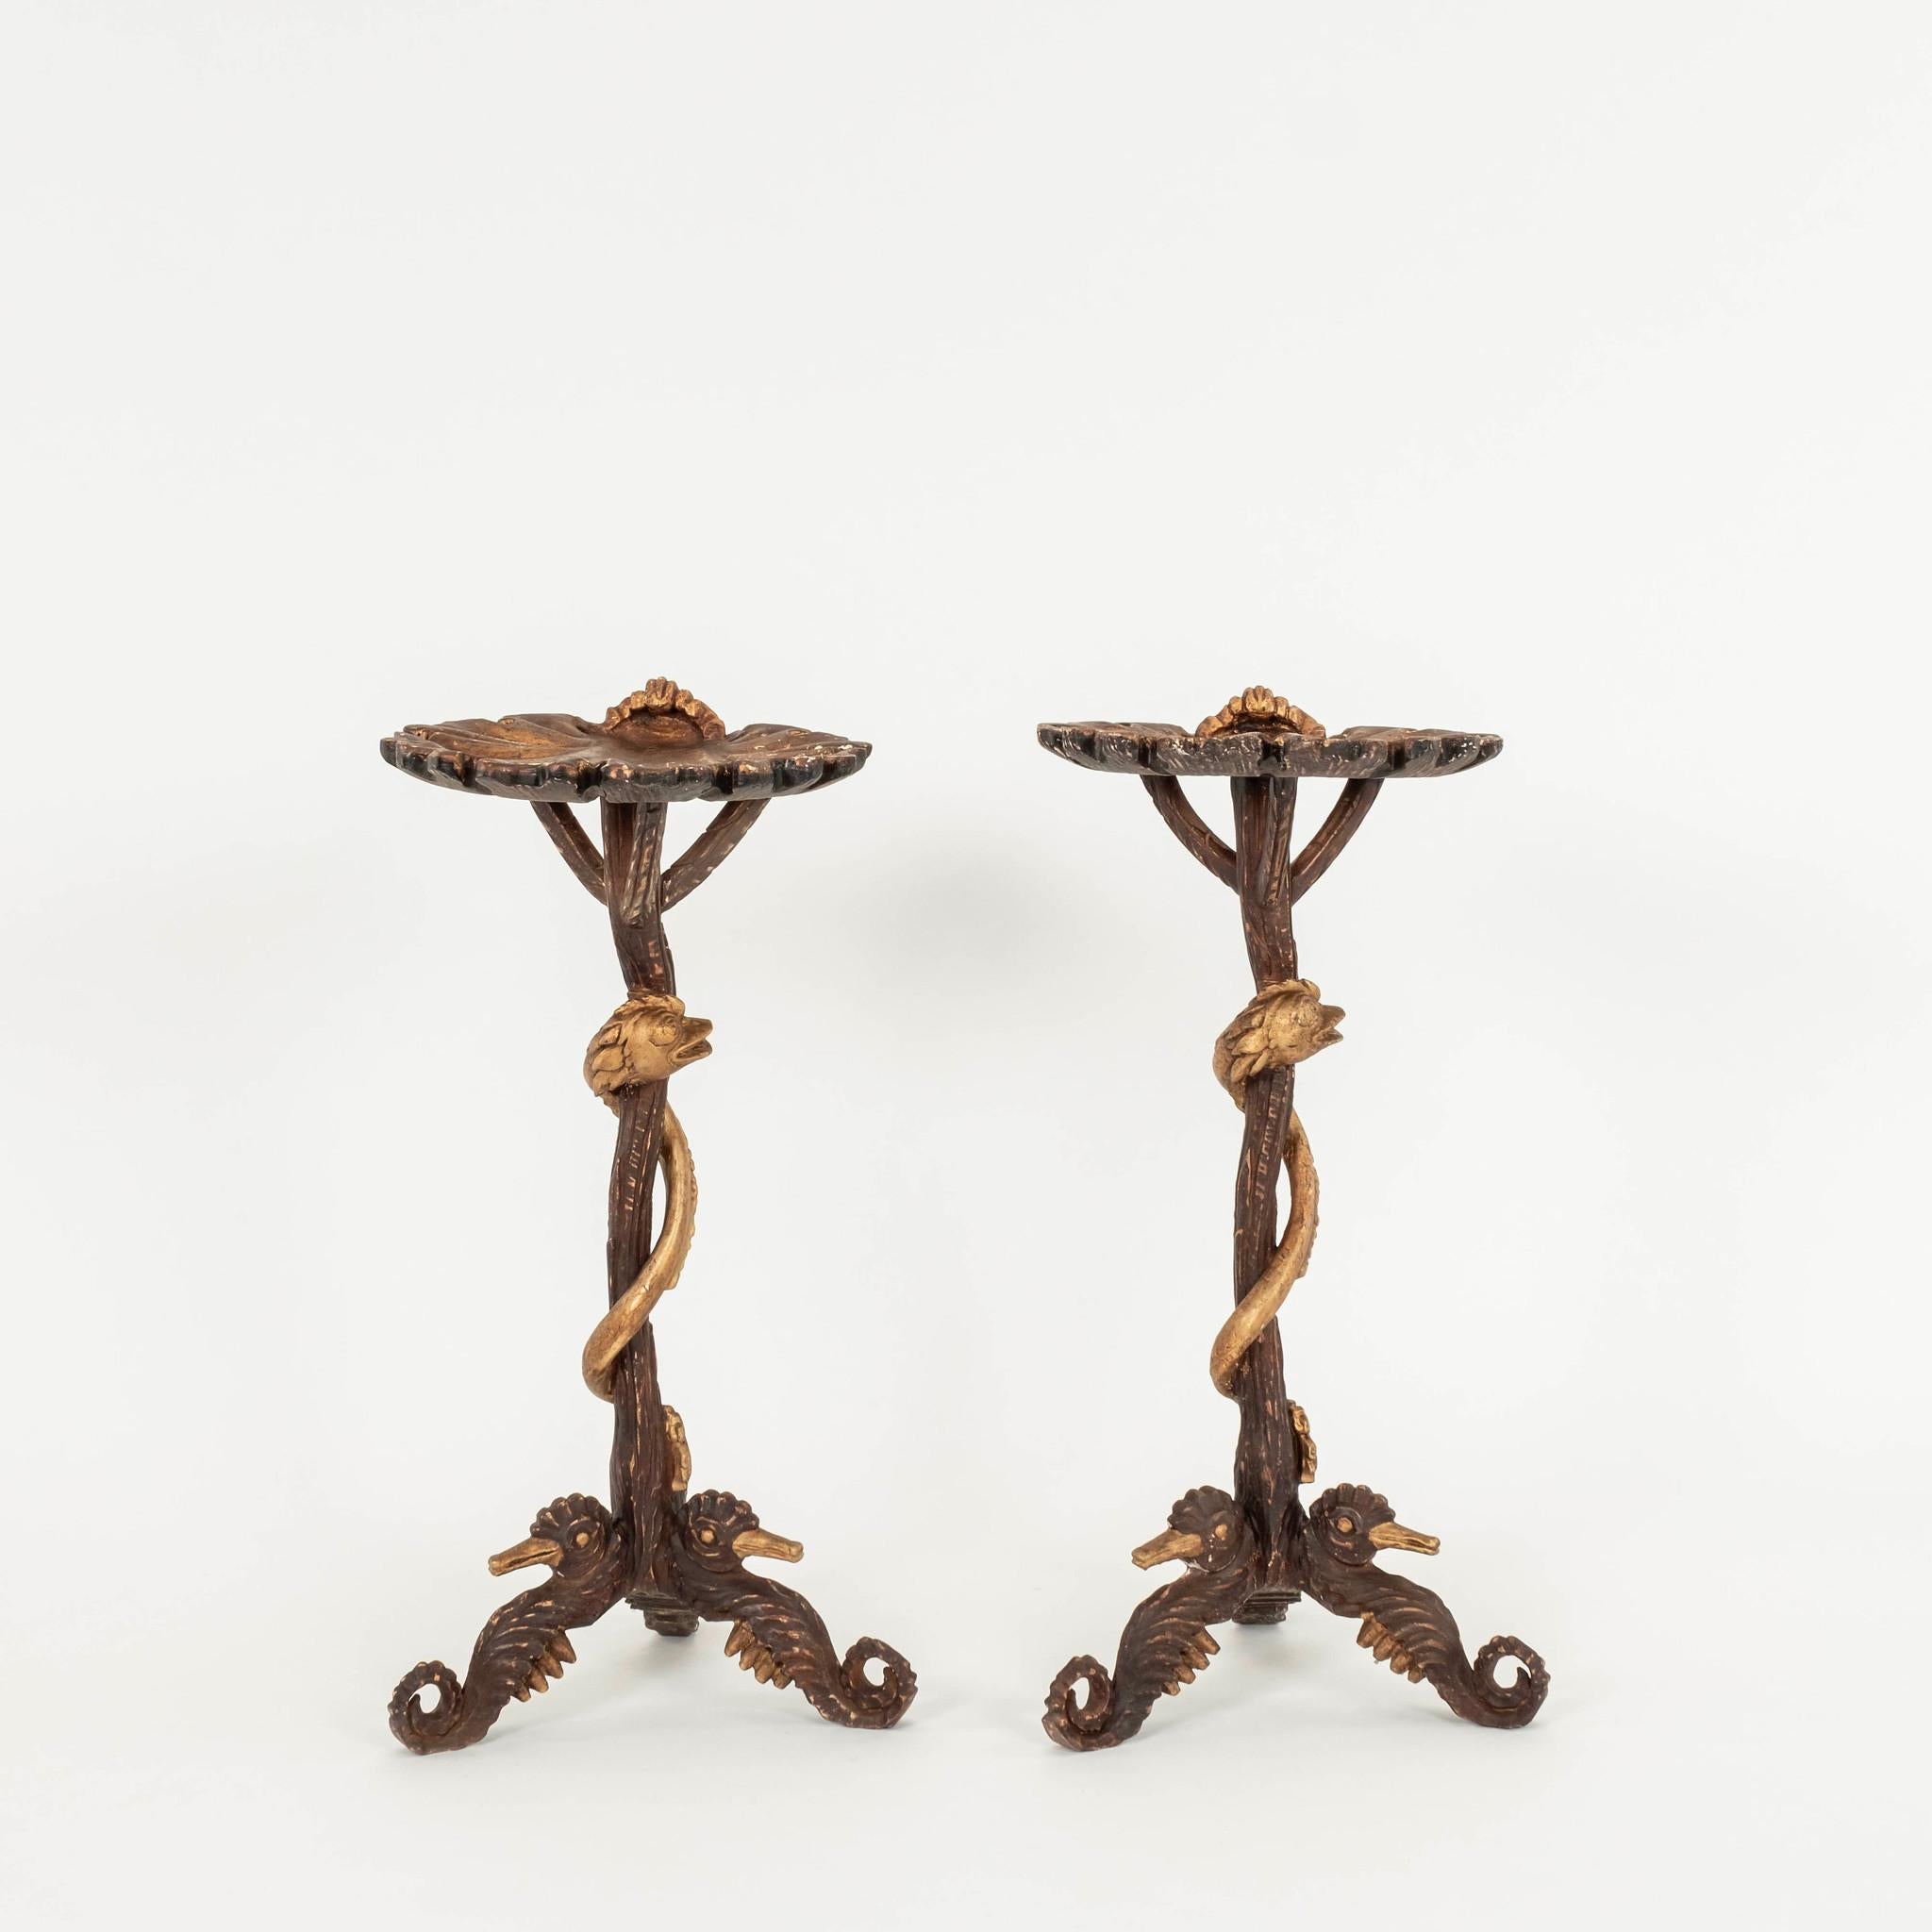 Wonderful patinated parcel gilt 20th century tall Venetian grotto occasional table featuring seahorse legs and serpent supporting shell table top, all carved in the Rococo style. Two available, sold individually